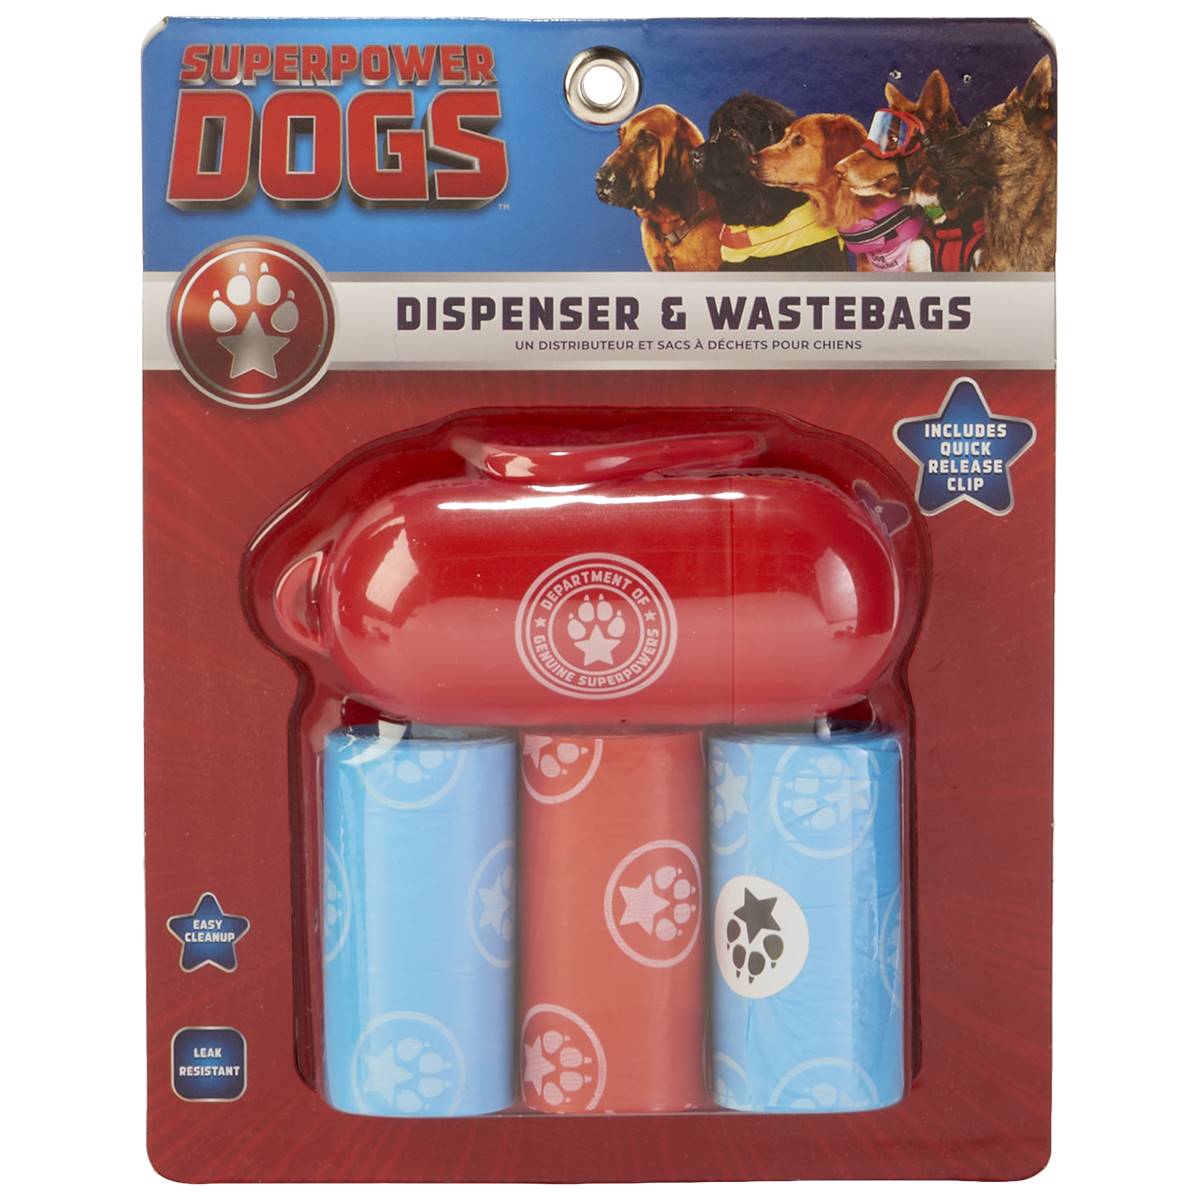 SuperPower Dogs Dispenser & Waste Bags